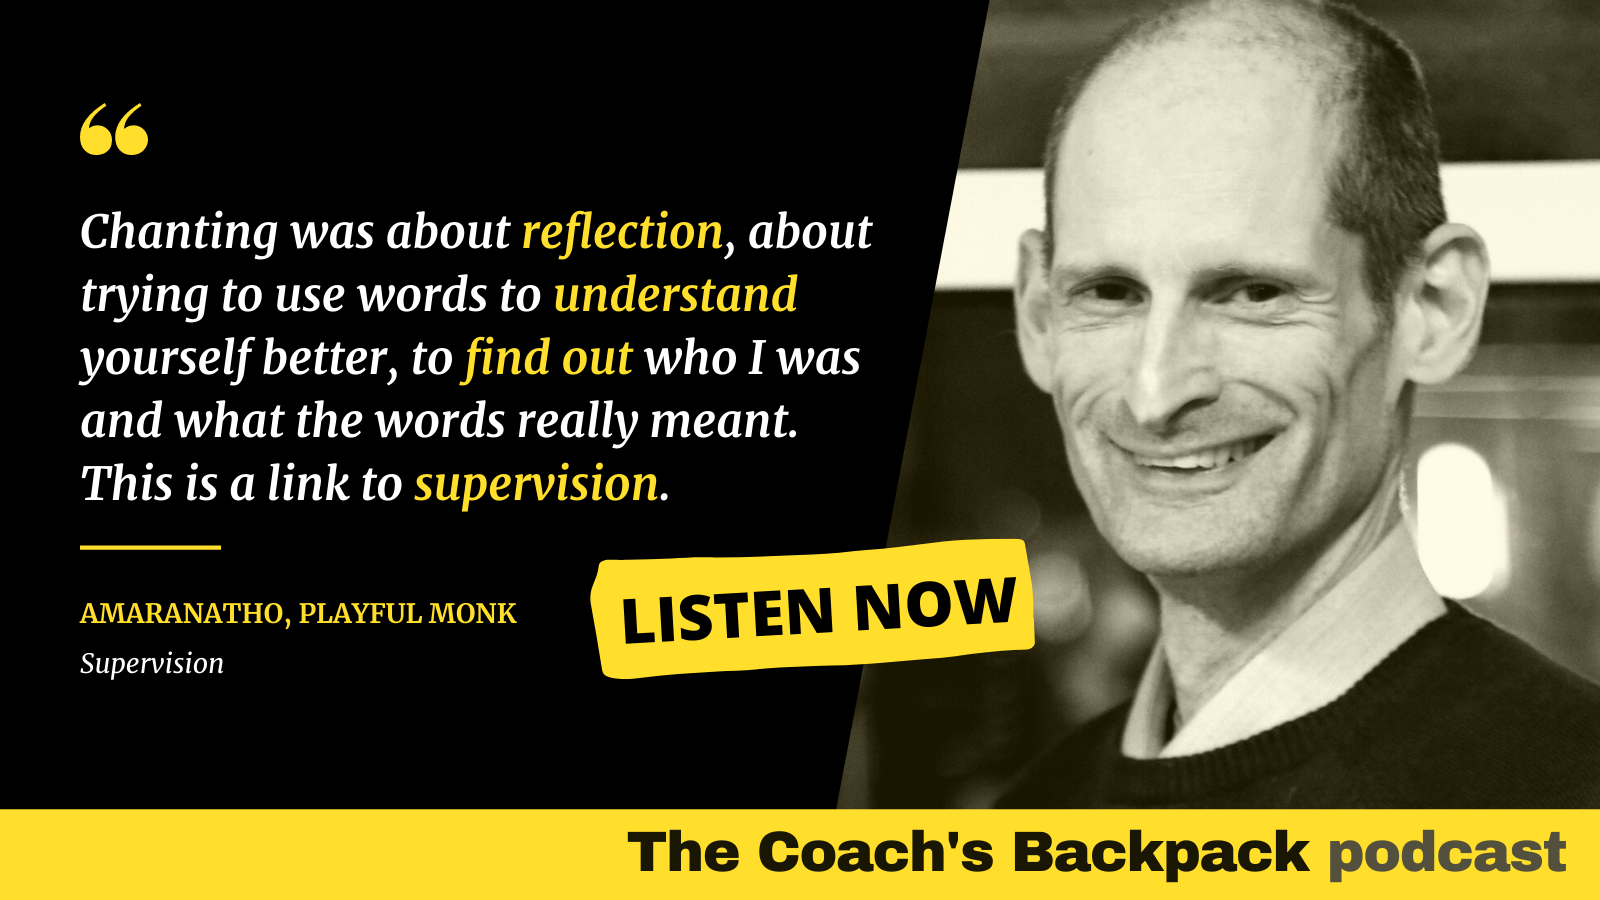 The coach’s  backpack podcast on Coaching Supervision